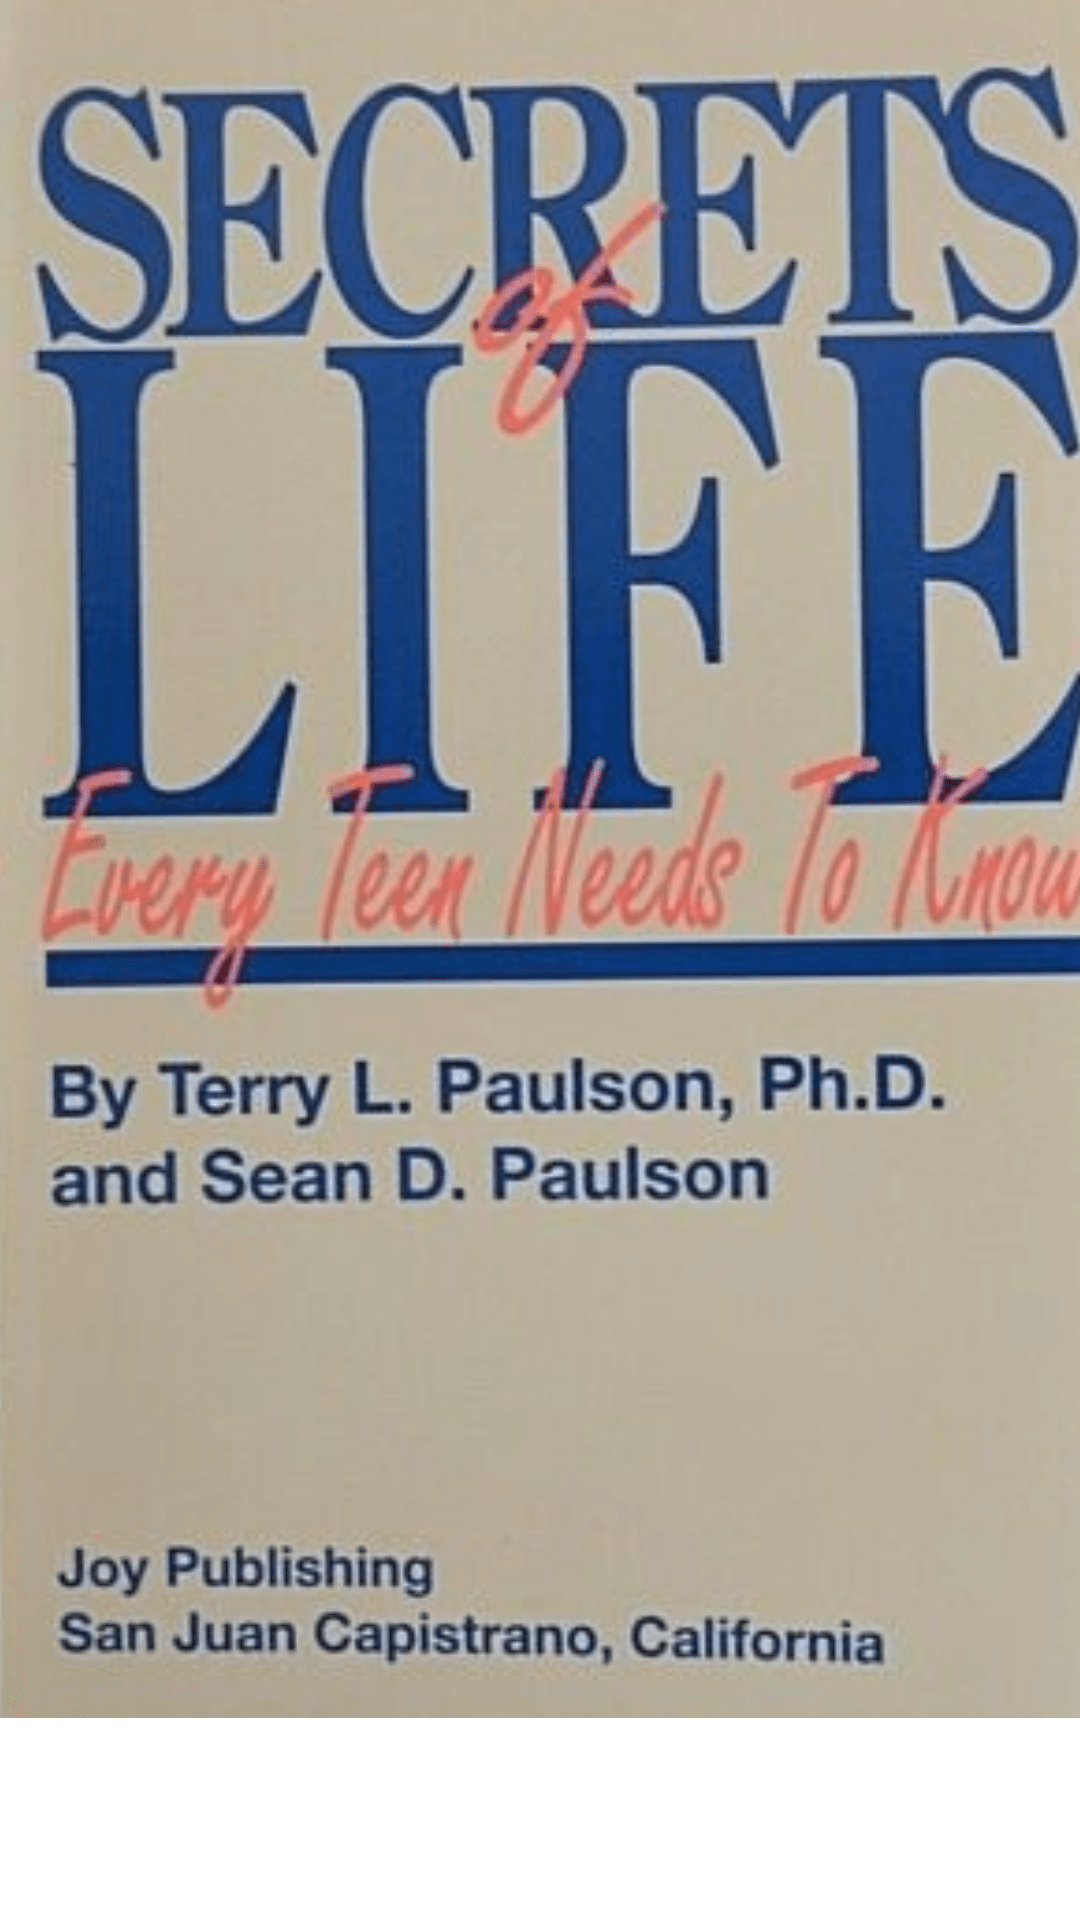 Secrets of Life Every Teen Needs to Know